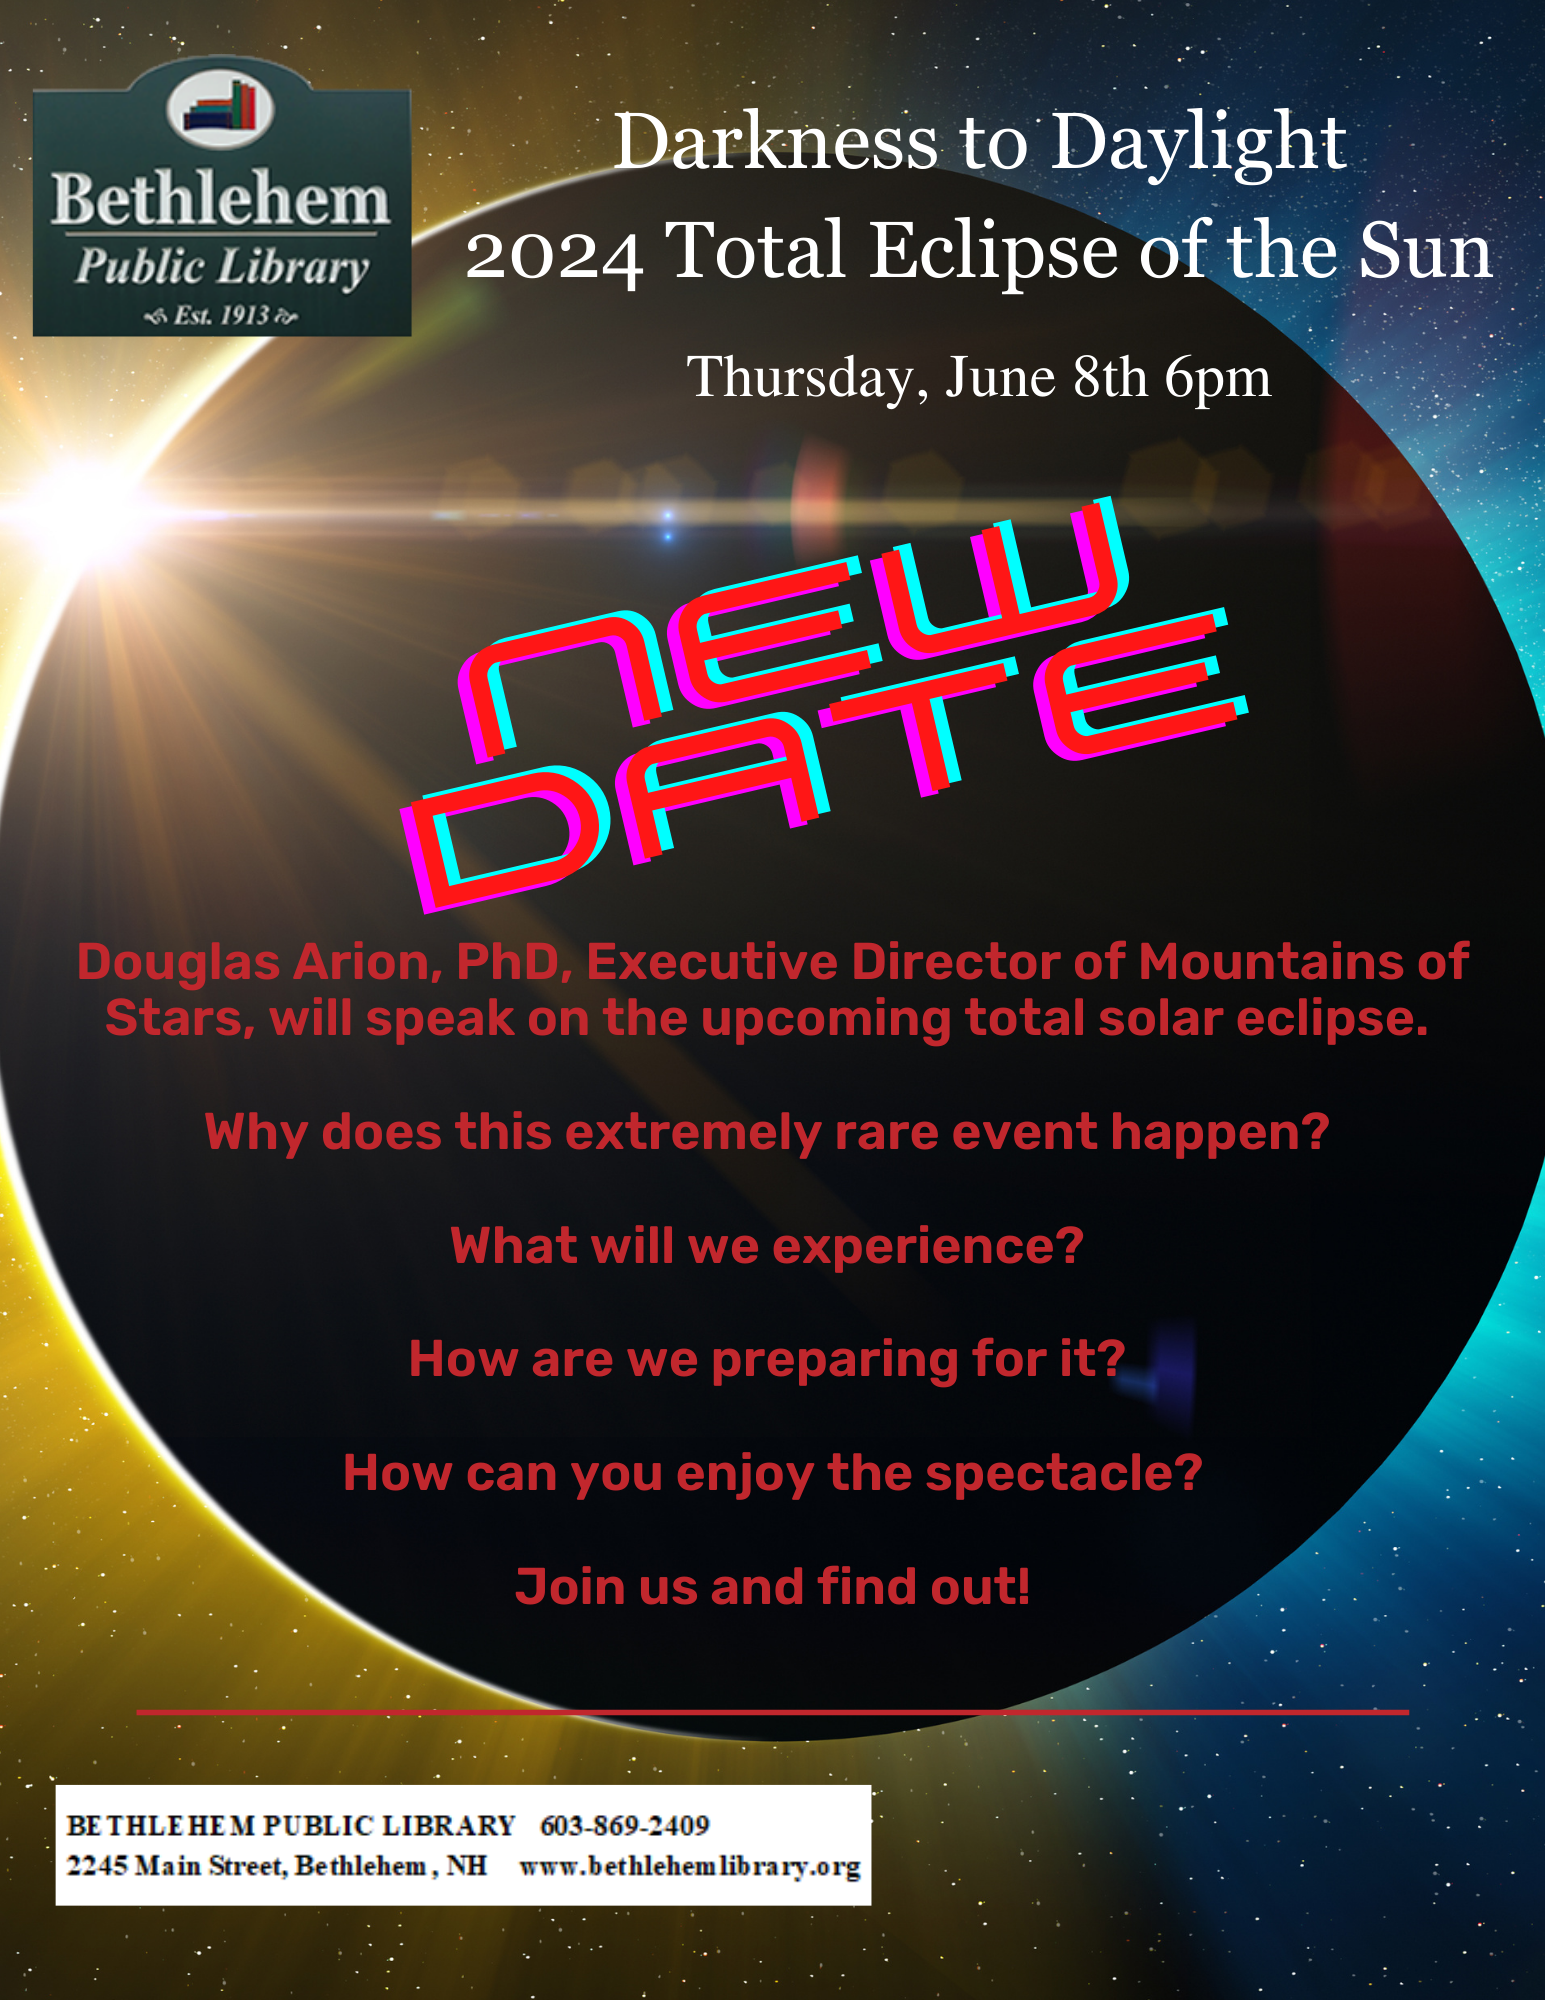 Darkness in Daylight: The 2024 Total Eclipse of the Sun NEW DATE:  Thursday, June 8th 6pm Douglas Arion, PhD, Executive Director of Mountains of Stars, will speak on the upcoming  total solar eclipse.  Why does this extremely rare event happen? What will we experience? How are we preparing for it? How can you enjoy the spectacle? Join us and find out! 